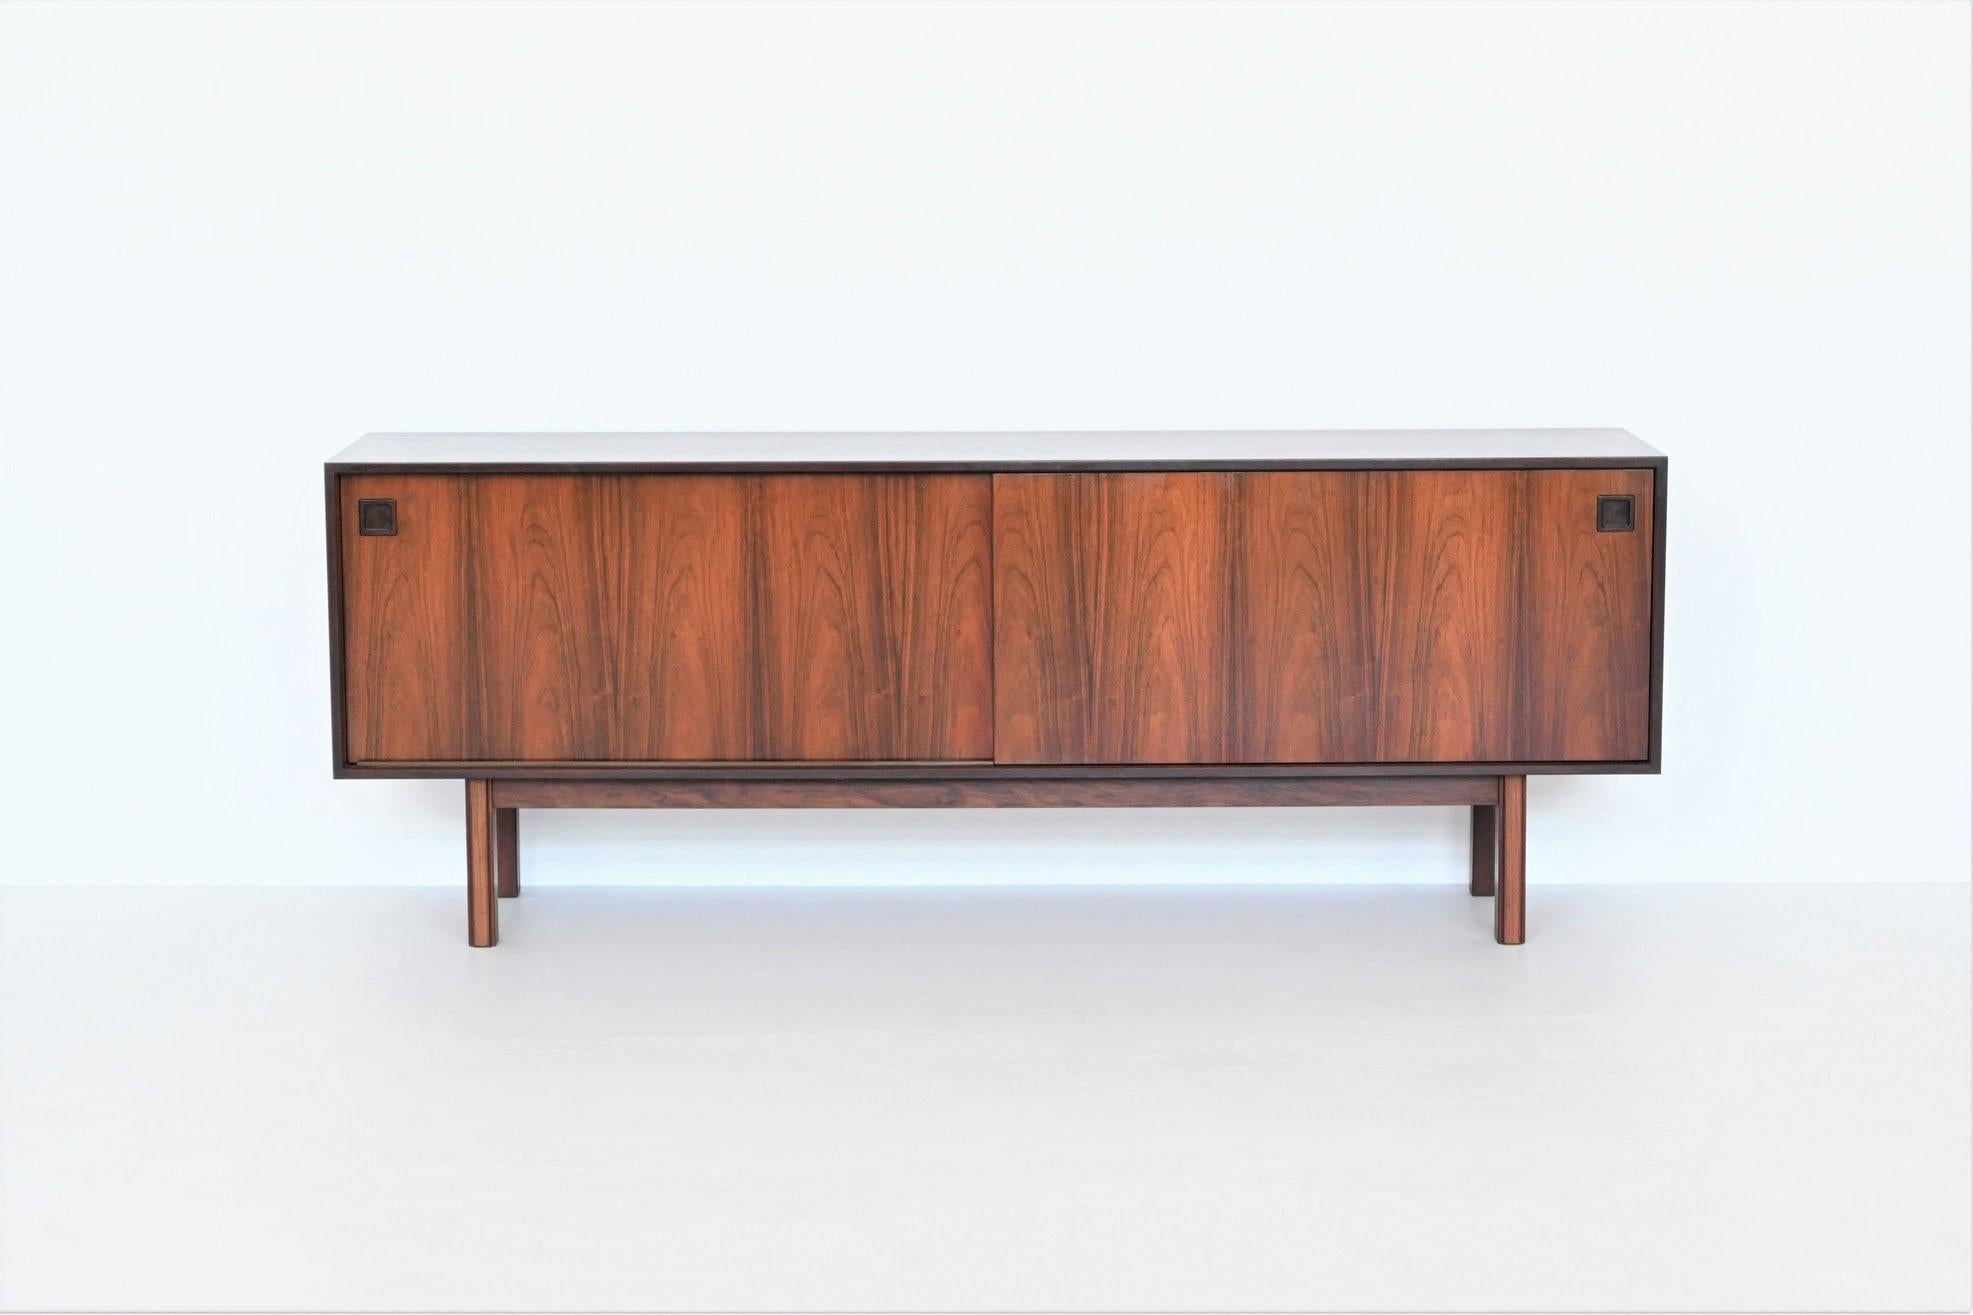 Beautiful and timeless sideboard model 21 designed Gunni Omann for Omann Junior, Denmark 1960. This well-crafted sideboard is executed in veneered rosewood supported by a solid hardwood frame. The wood has a stunning colour and striking grain